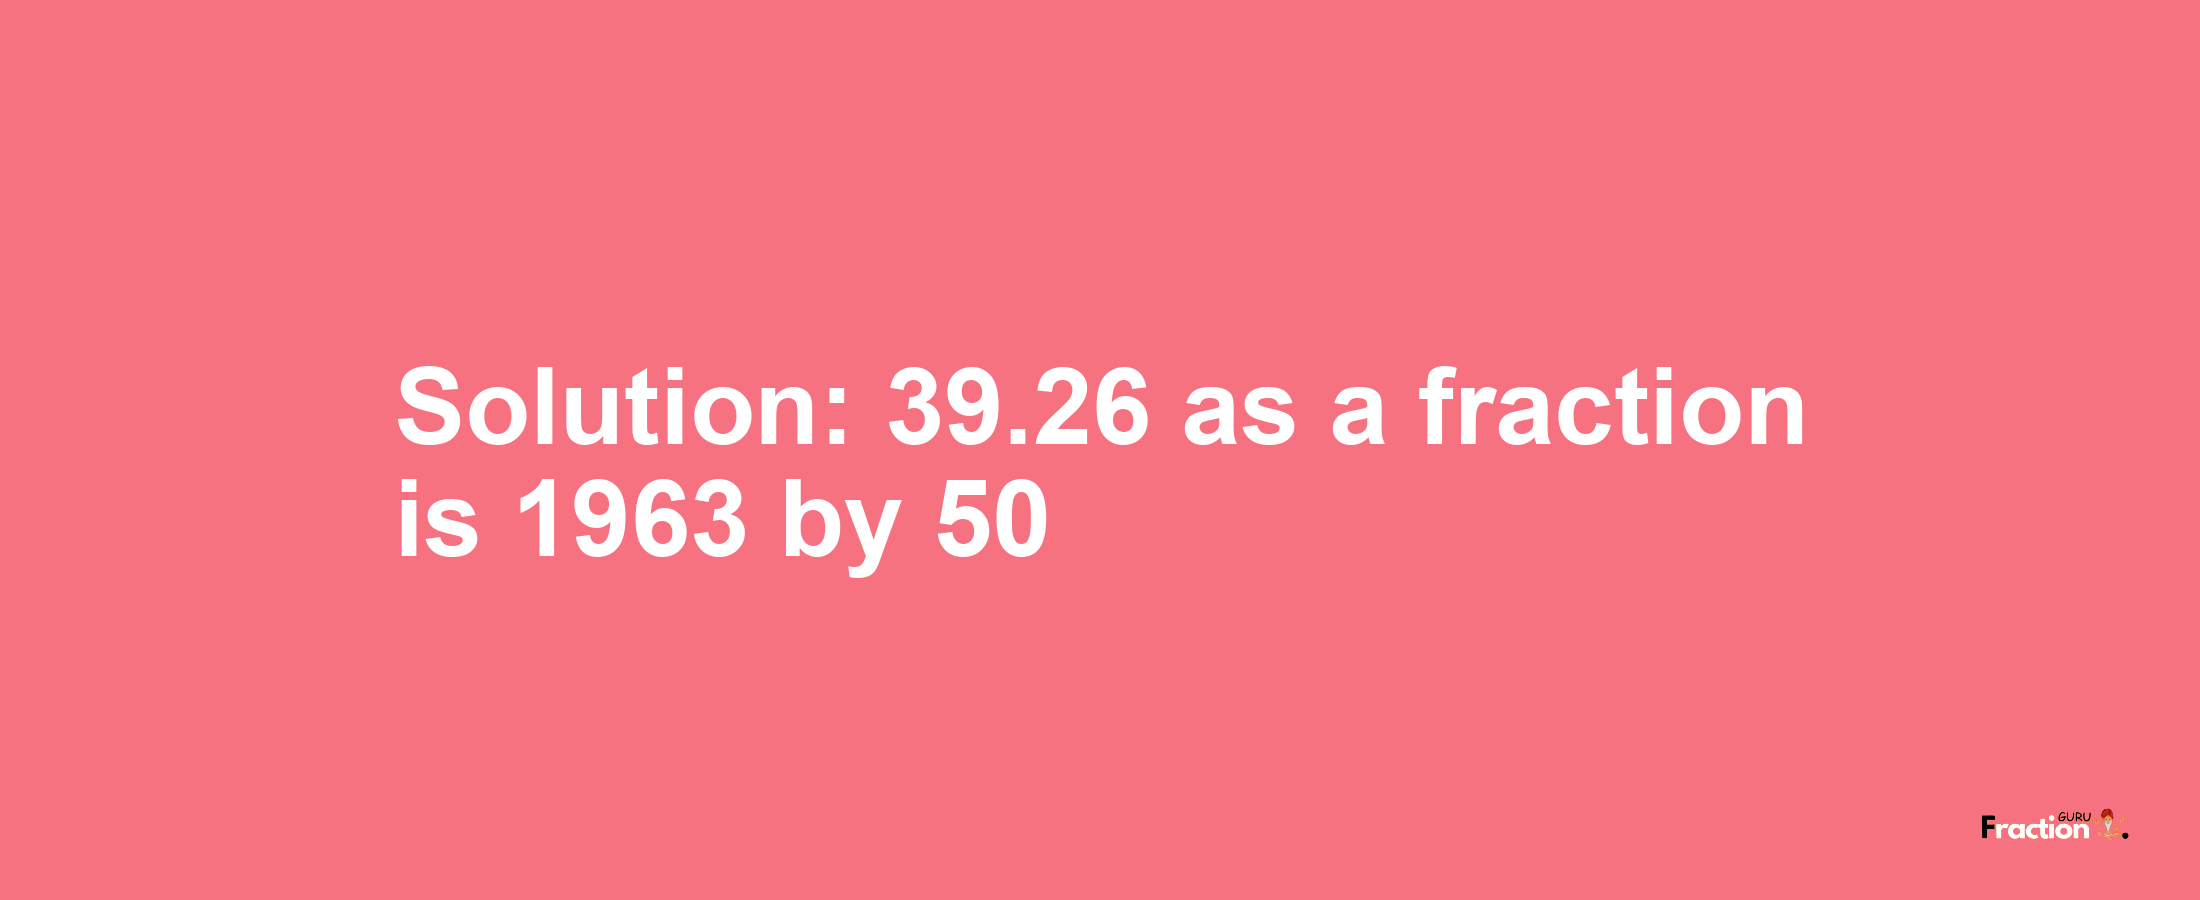 Solution:39.26 as a fraction is 1963/50